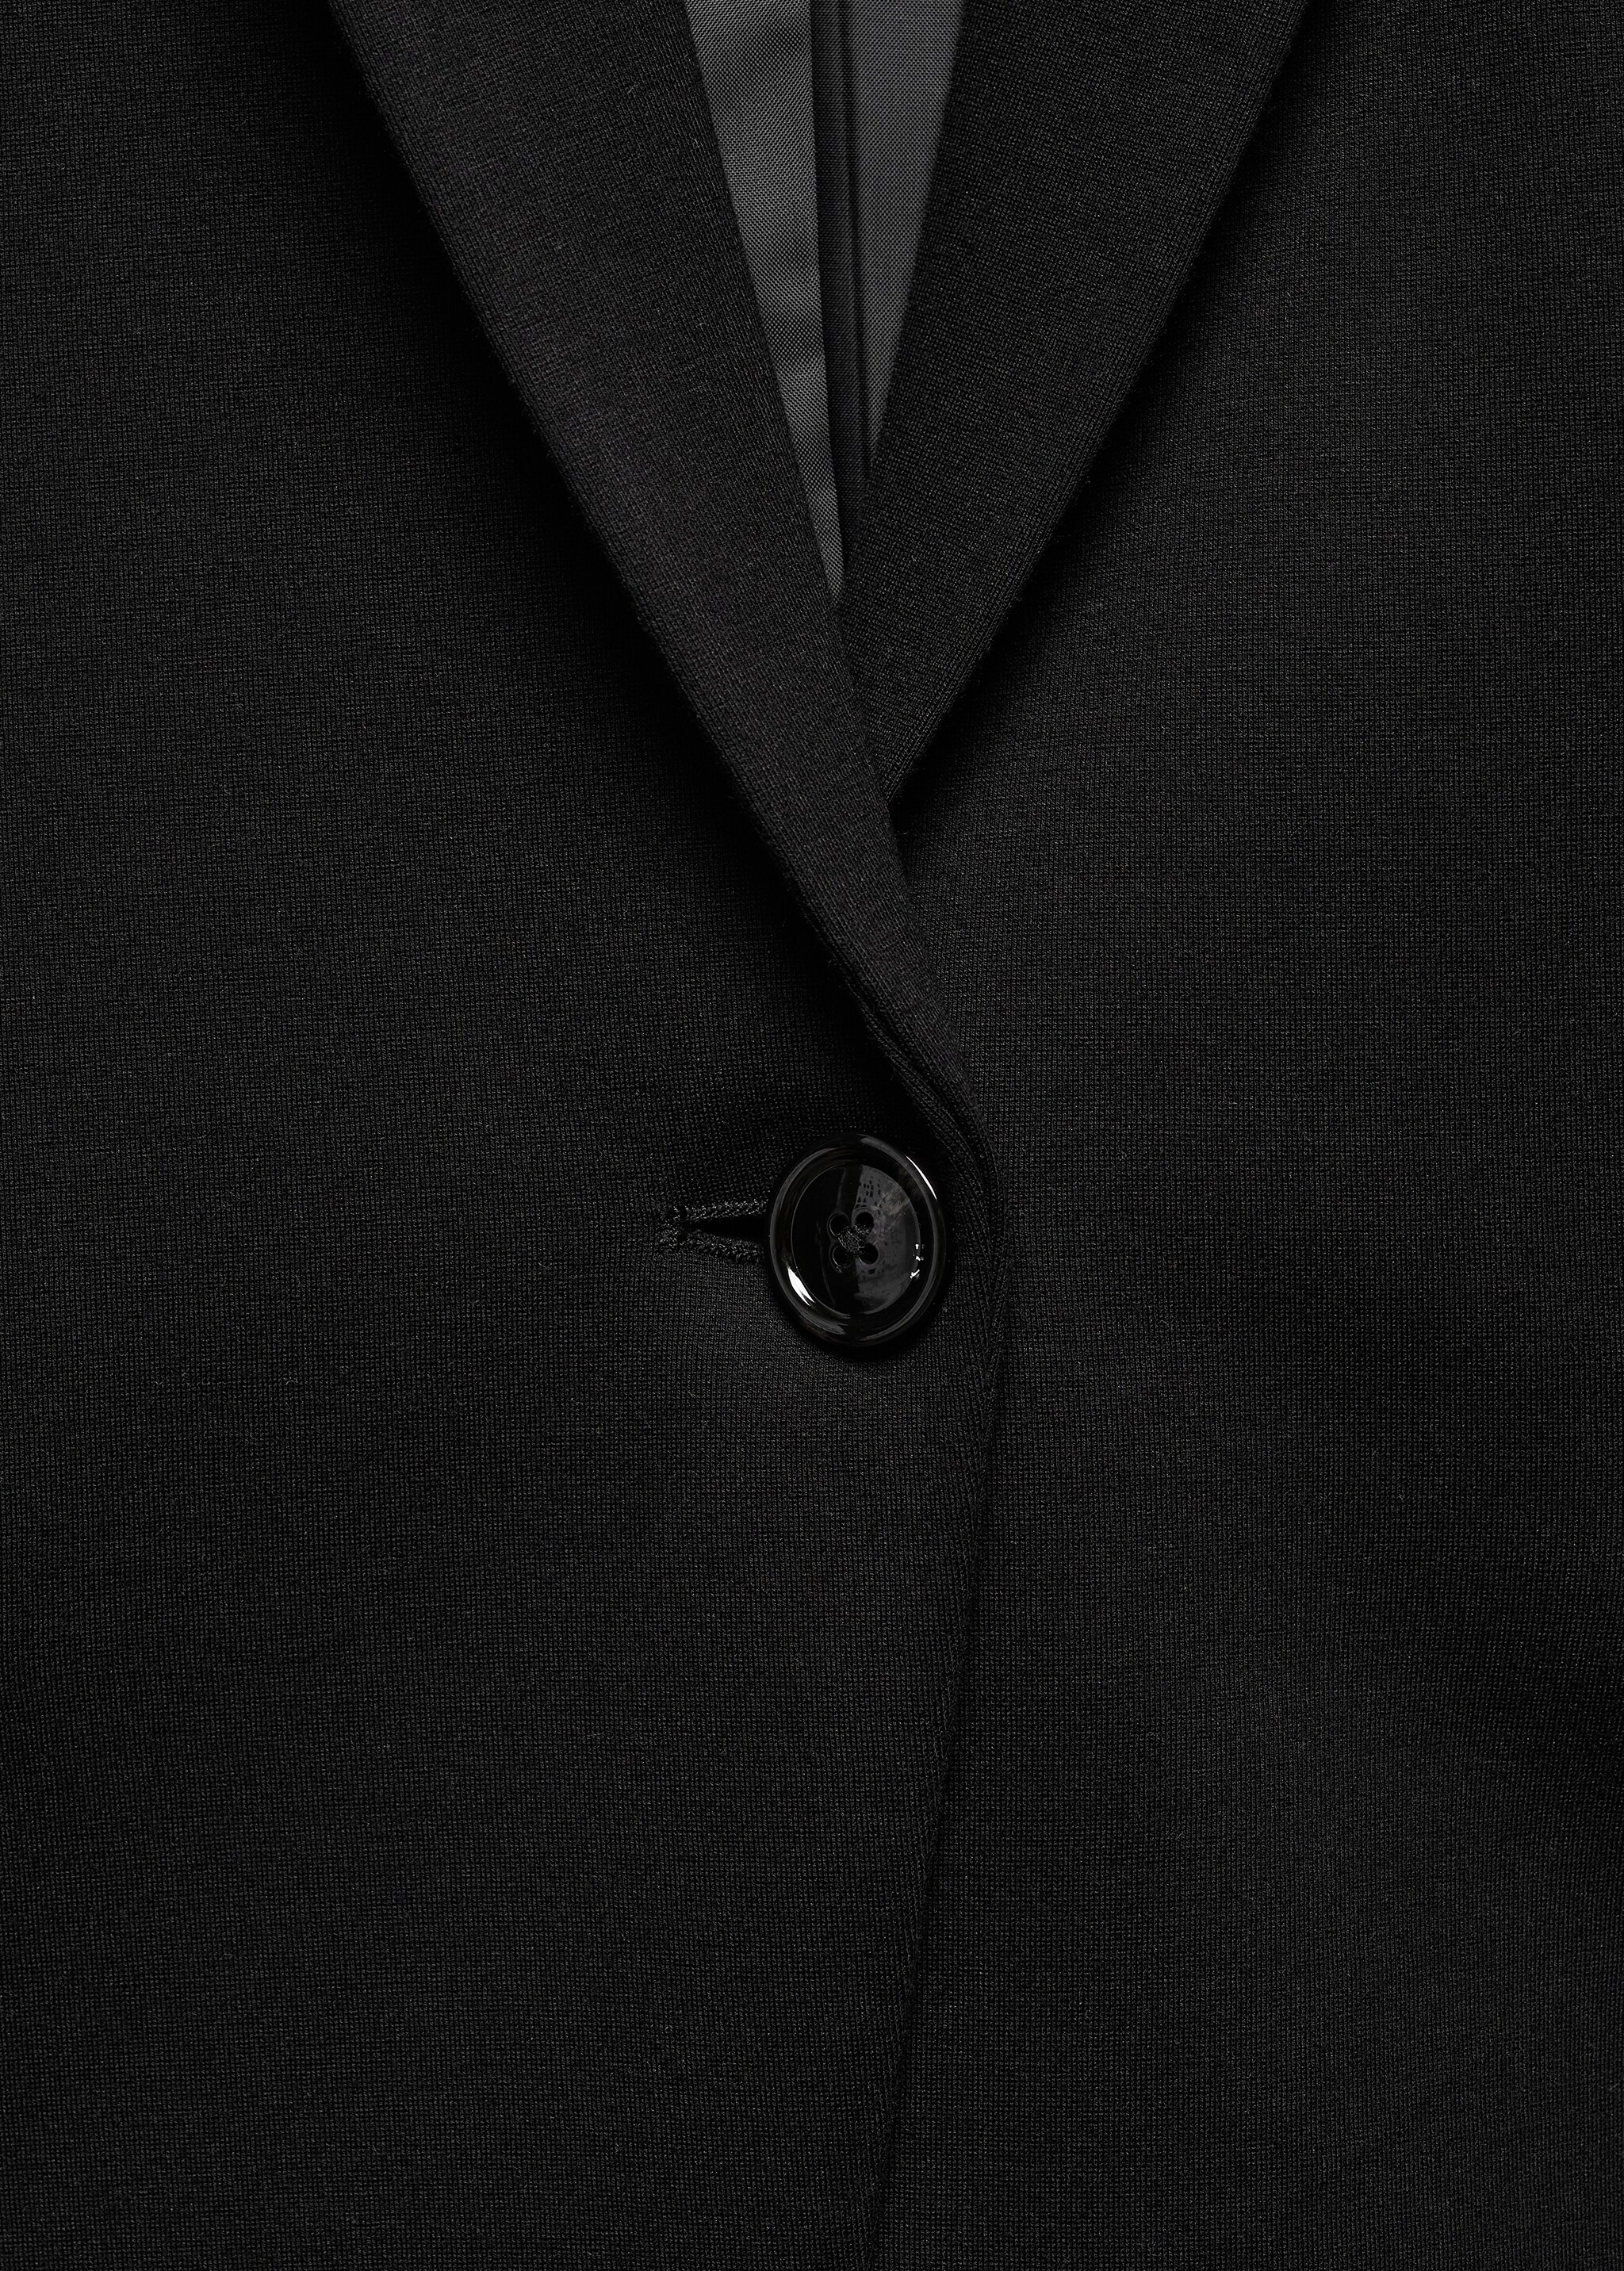 Fitted jacket with blunt stitching - Details of the article 8